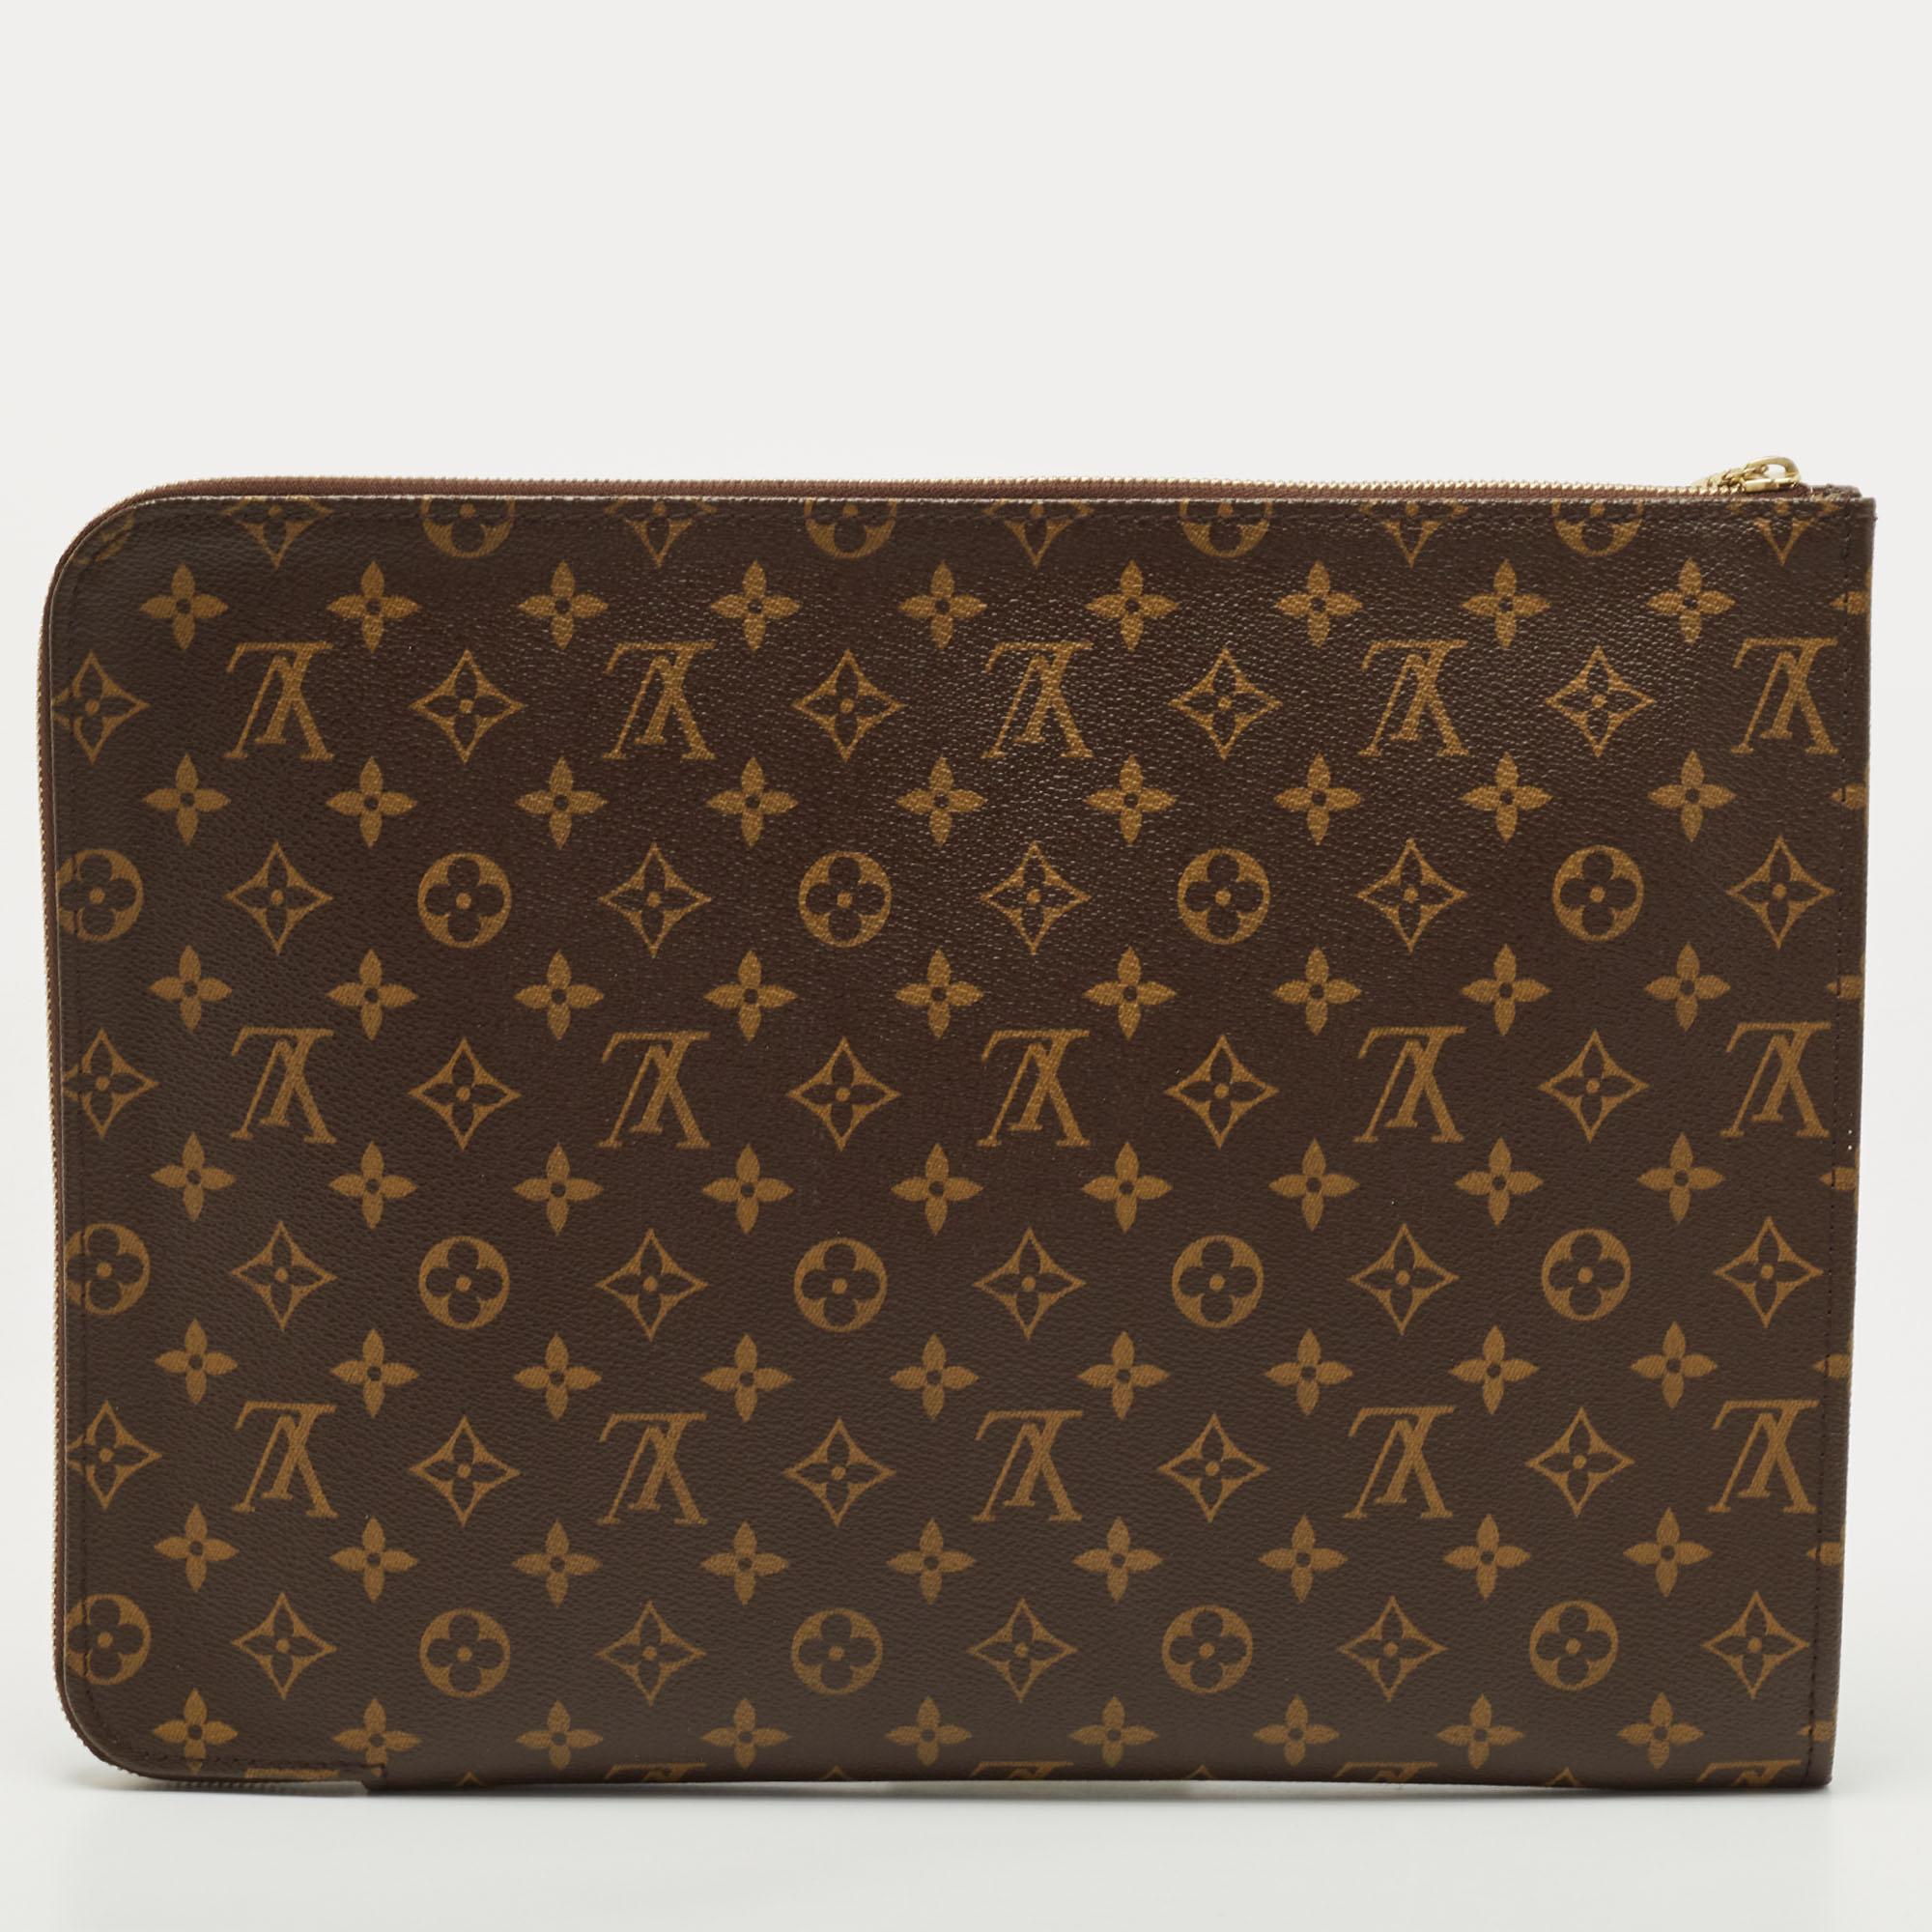 Have your documents in an organized manner with this portfolio case from Louis Vuitton. It has been crafted from fine materials and designed with a gold-tone zipper which protects the interior for you to carry your things.

